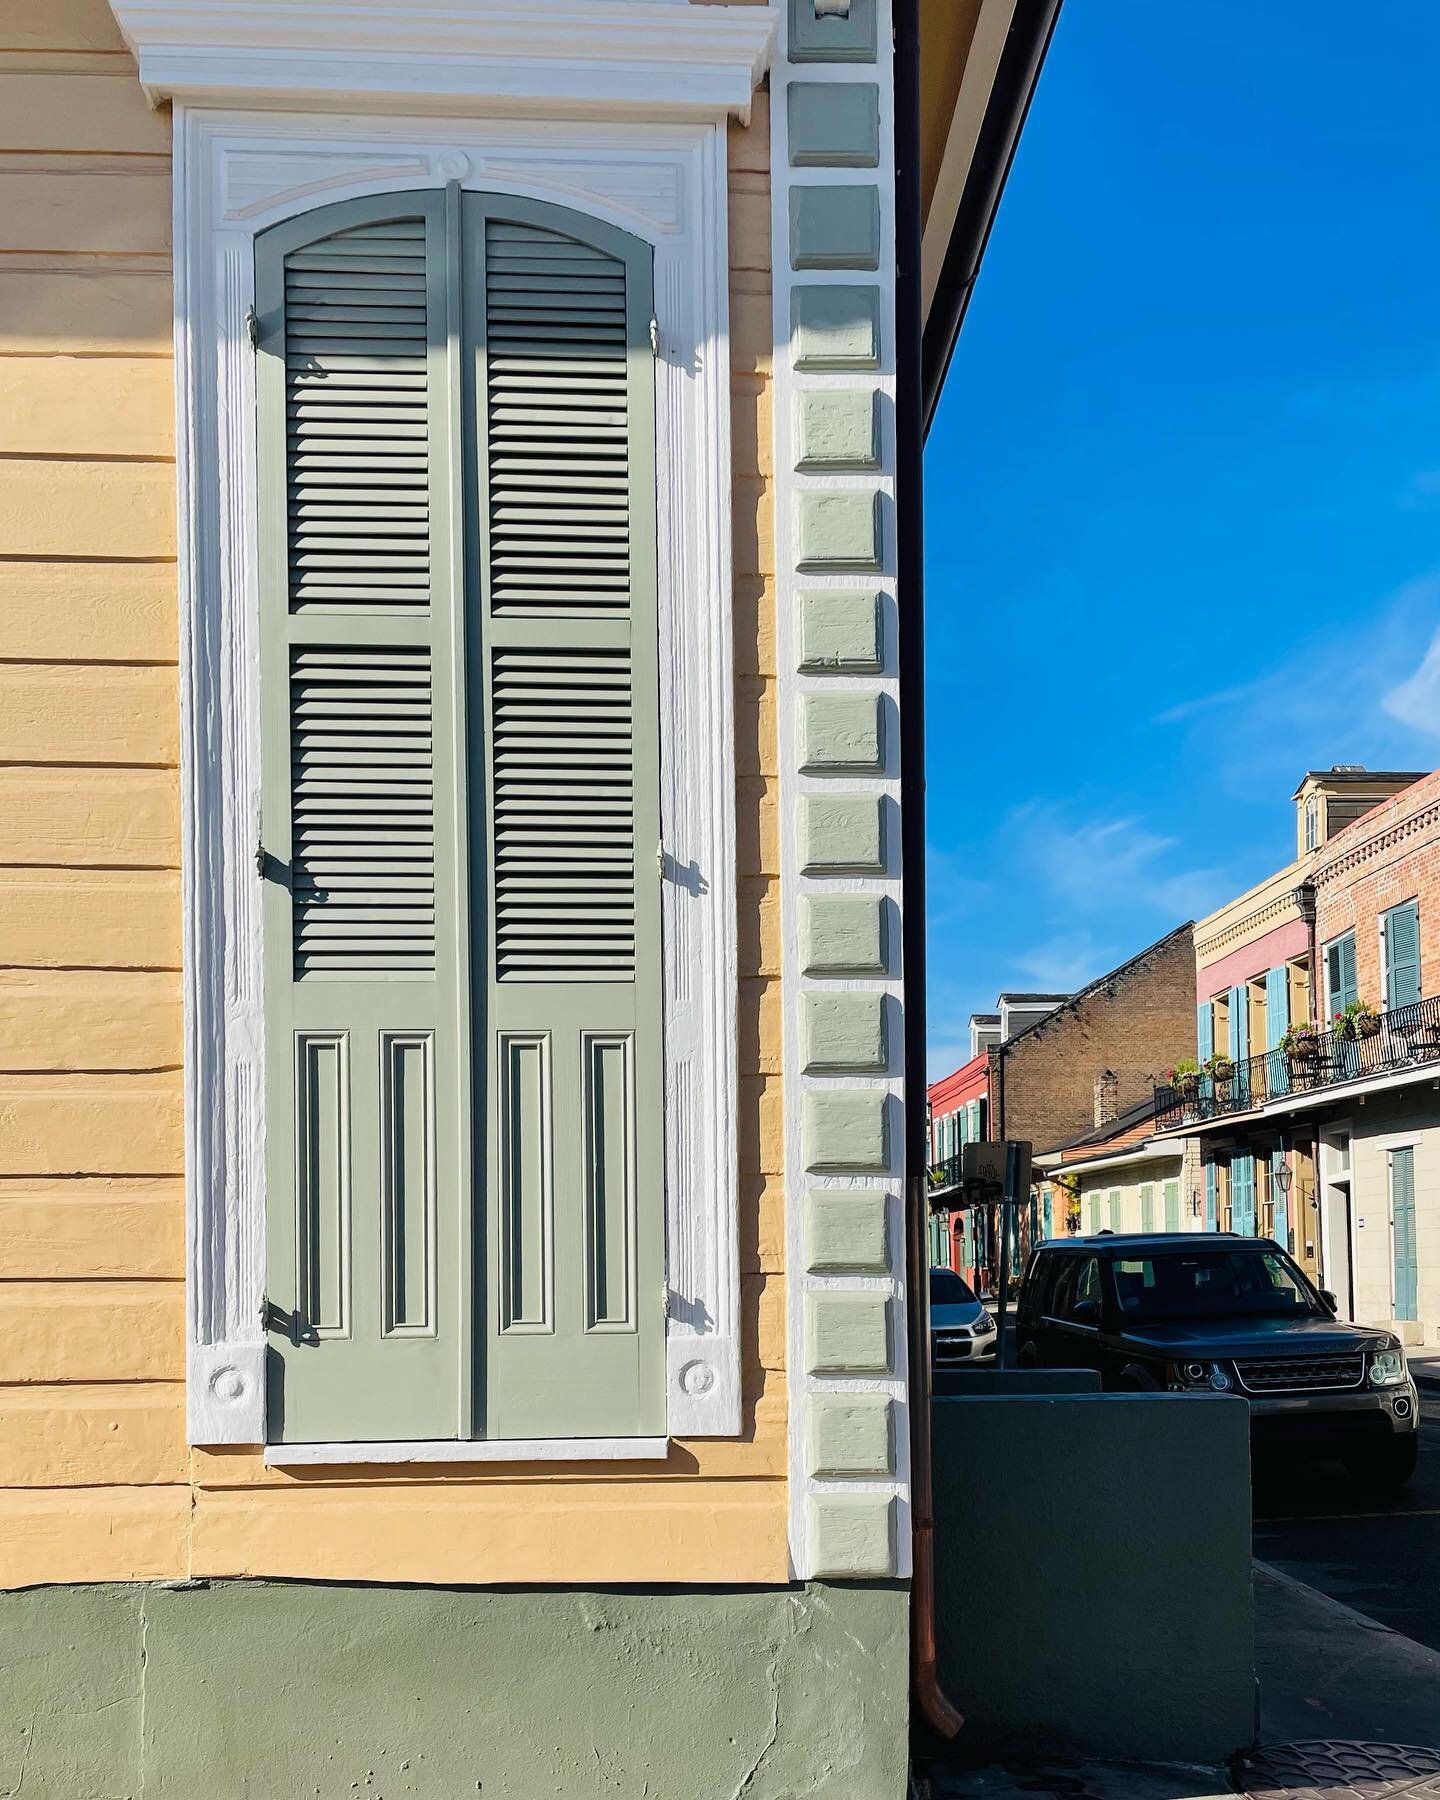 New job title: New Orleans architecture hunter. It&rsquo;s a really easy job. #ihaveathinyfordoors #frenchquarter